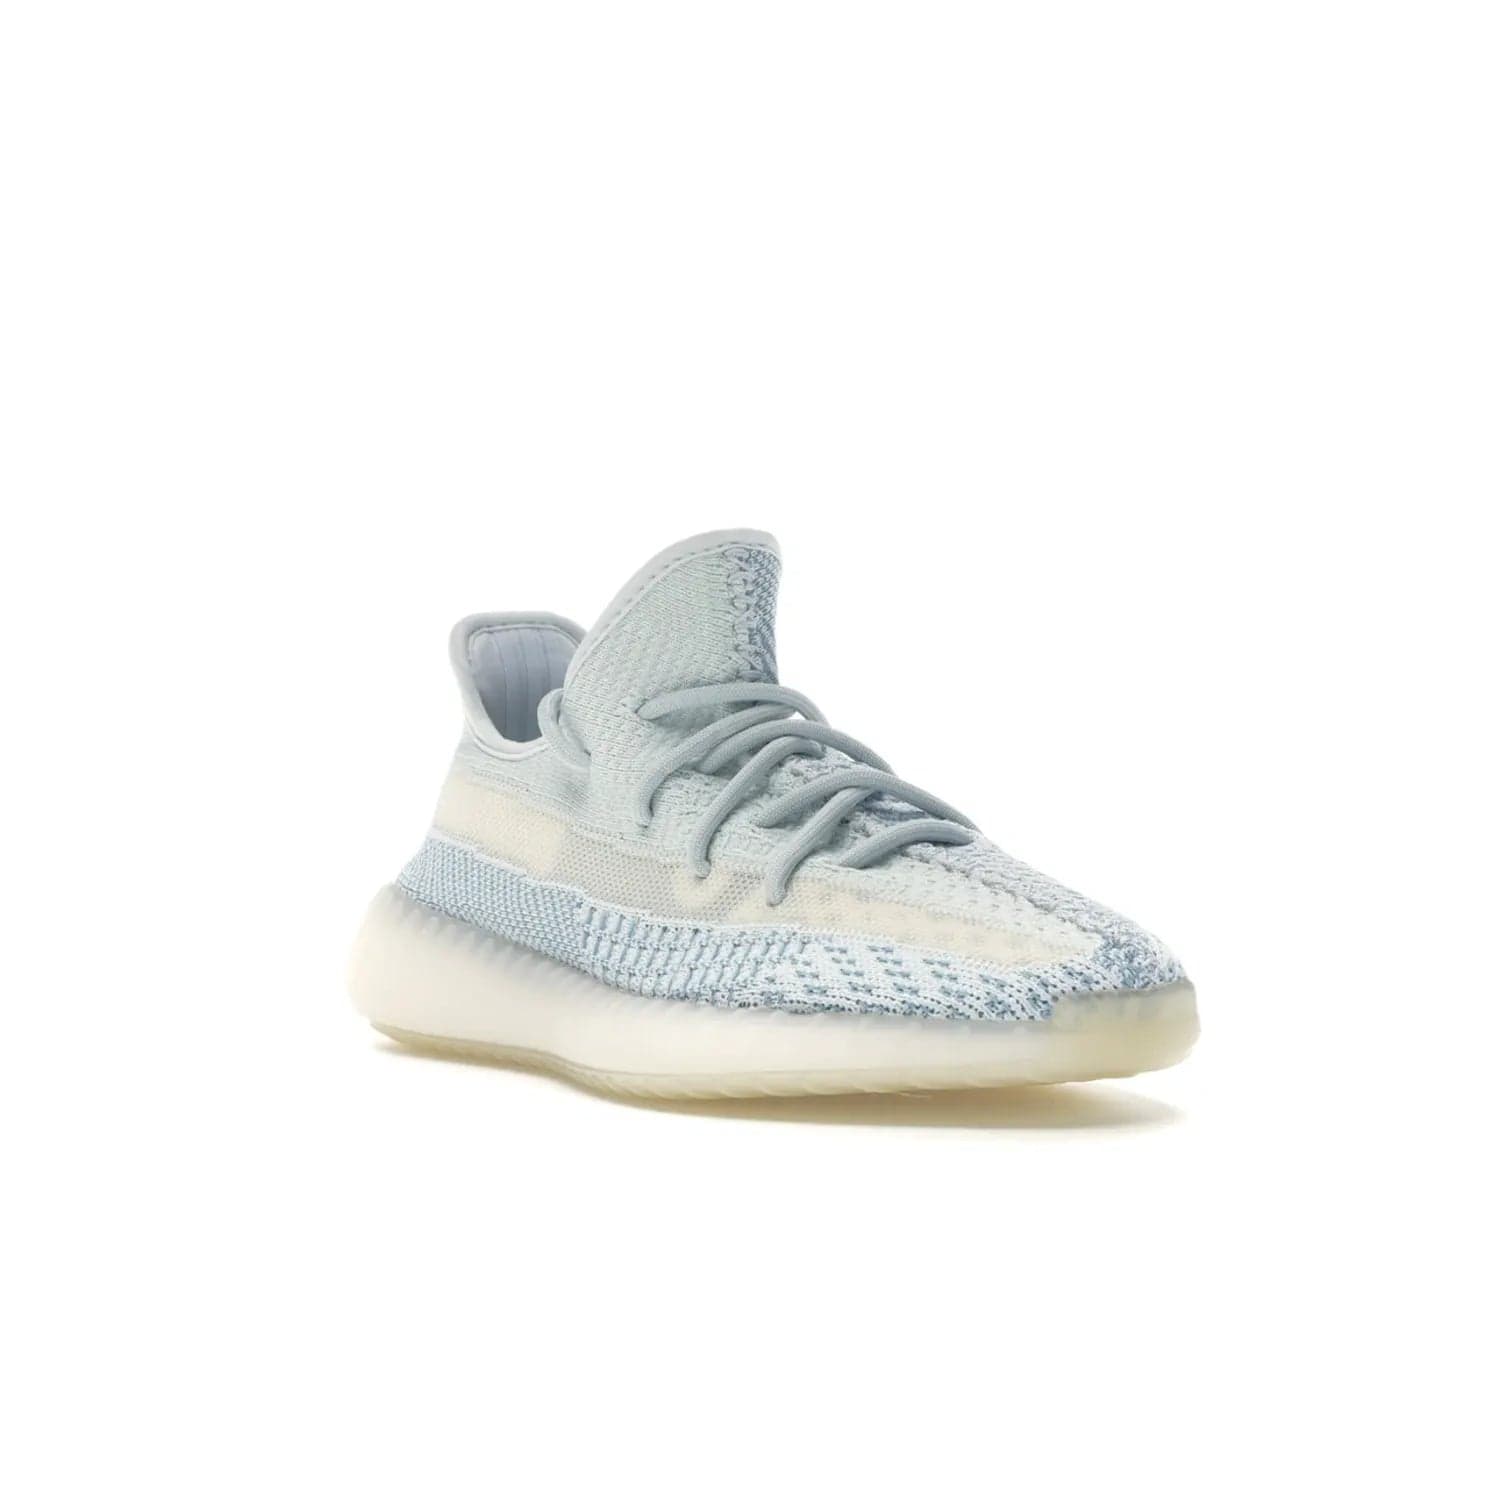 adidas Yeezy Boost 350 V2 Cloud White (Non-Reflective) - Image 6 - Only at www.BallersClubKickz.com - Uniquely designed adidas Yeezy Boost 350 V2 Cloud White (Non-Reflective) with a Primeknit upper in shades of cream and blue with a contrasting hard sole. A fashion-forward sneaker with a transparent strip and blue-and-white patterns.